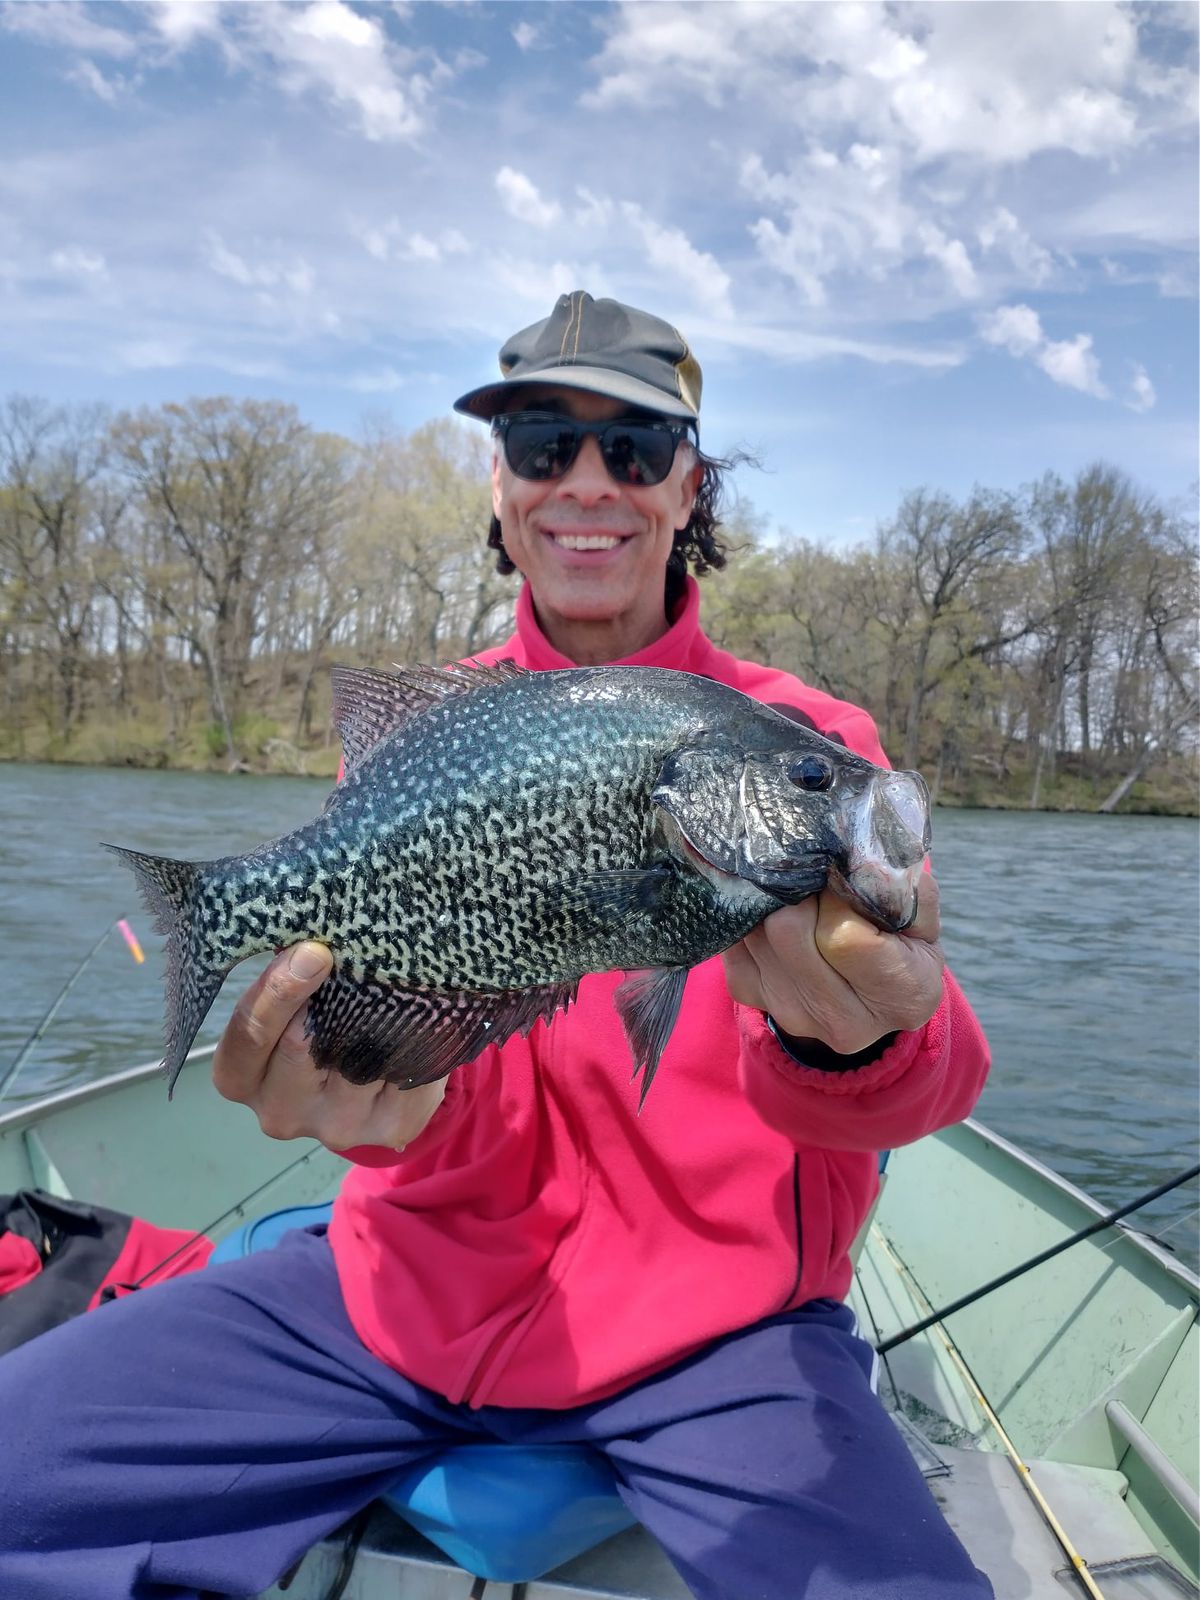 Rob Abouchar with his PB crappie from a farm pond. Provided photo